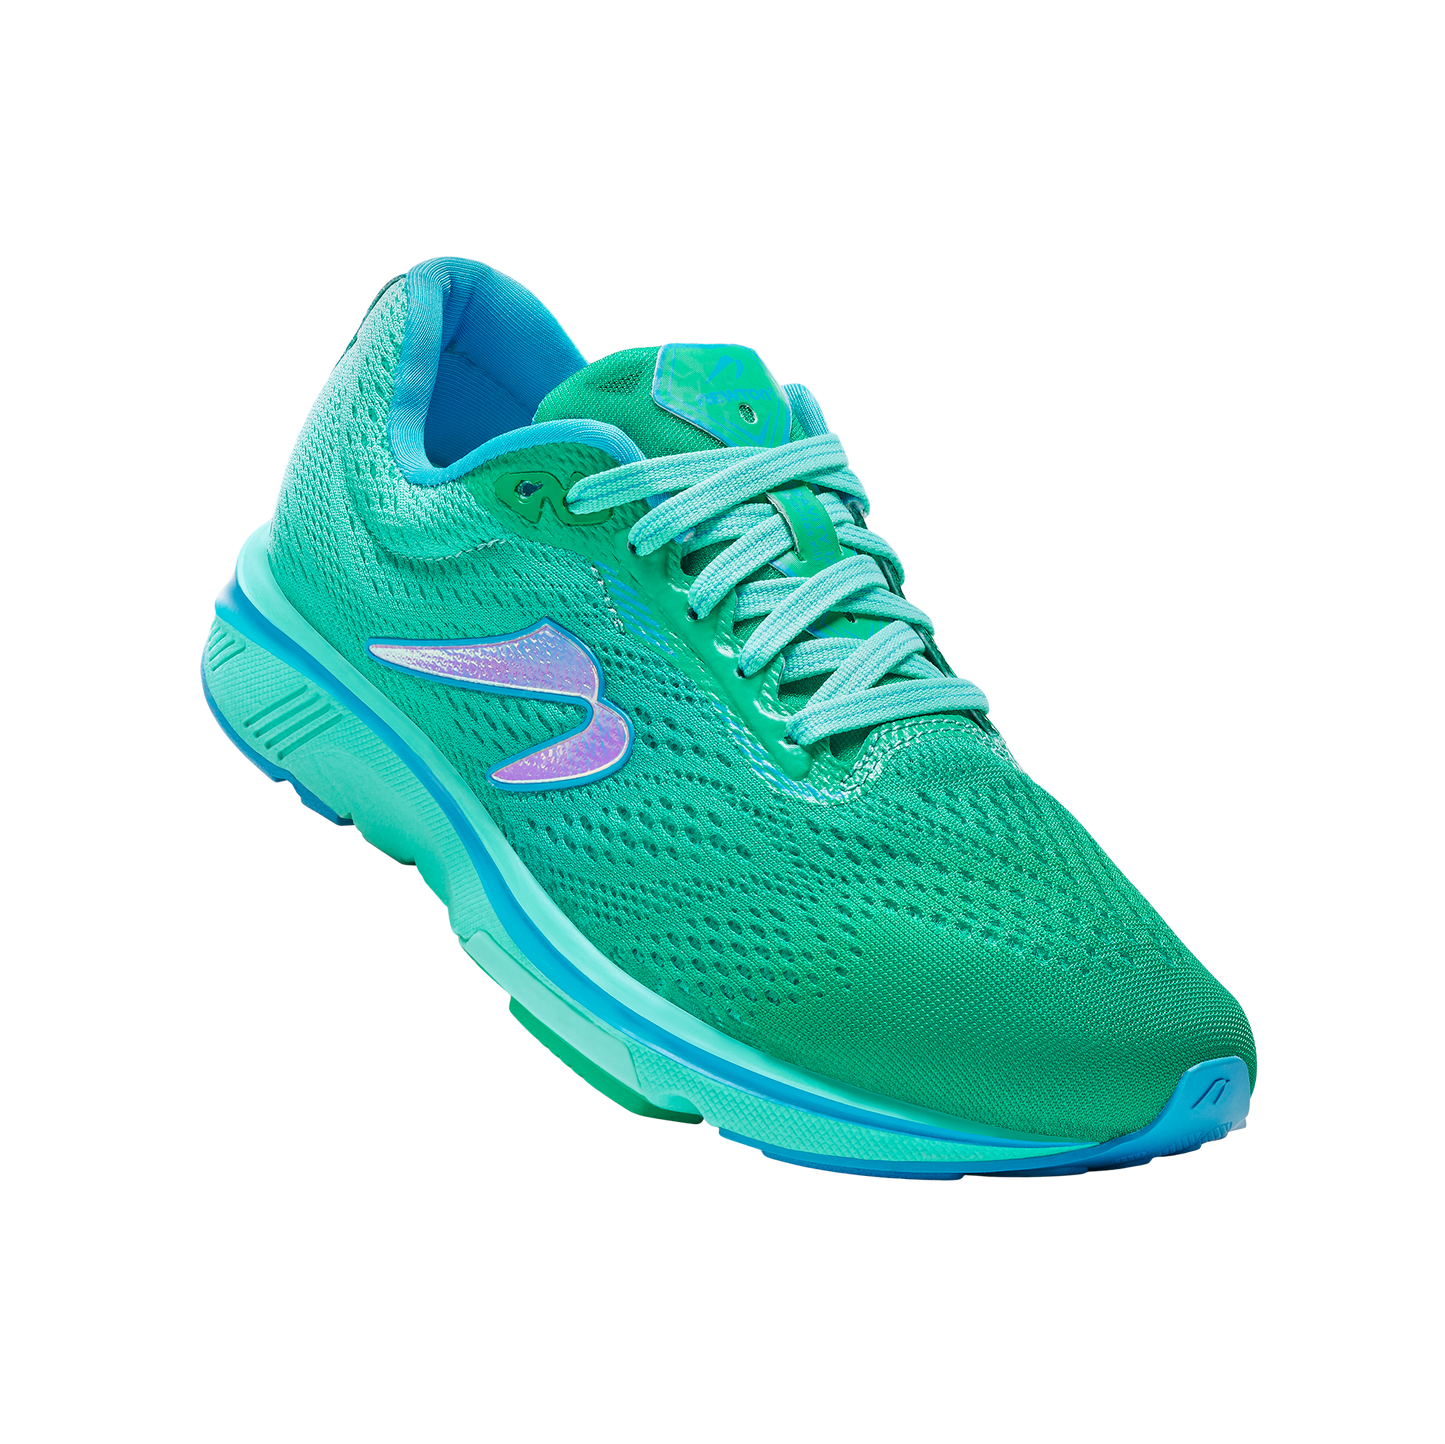 Women's Gravity 12 - Special color